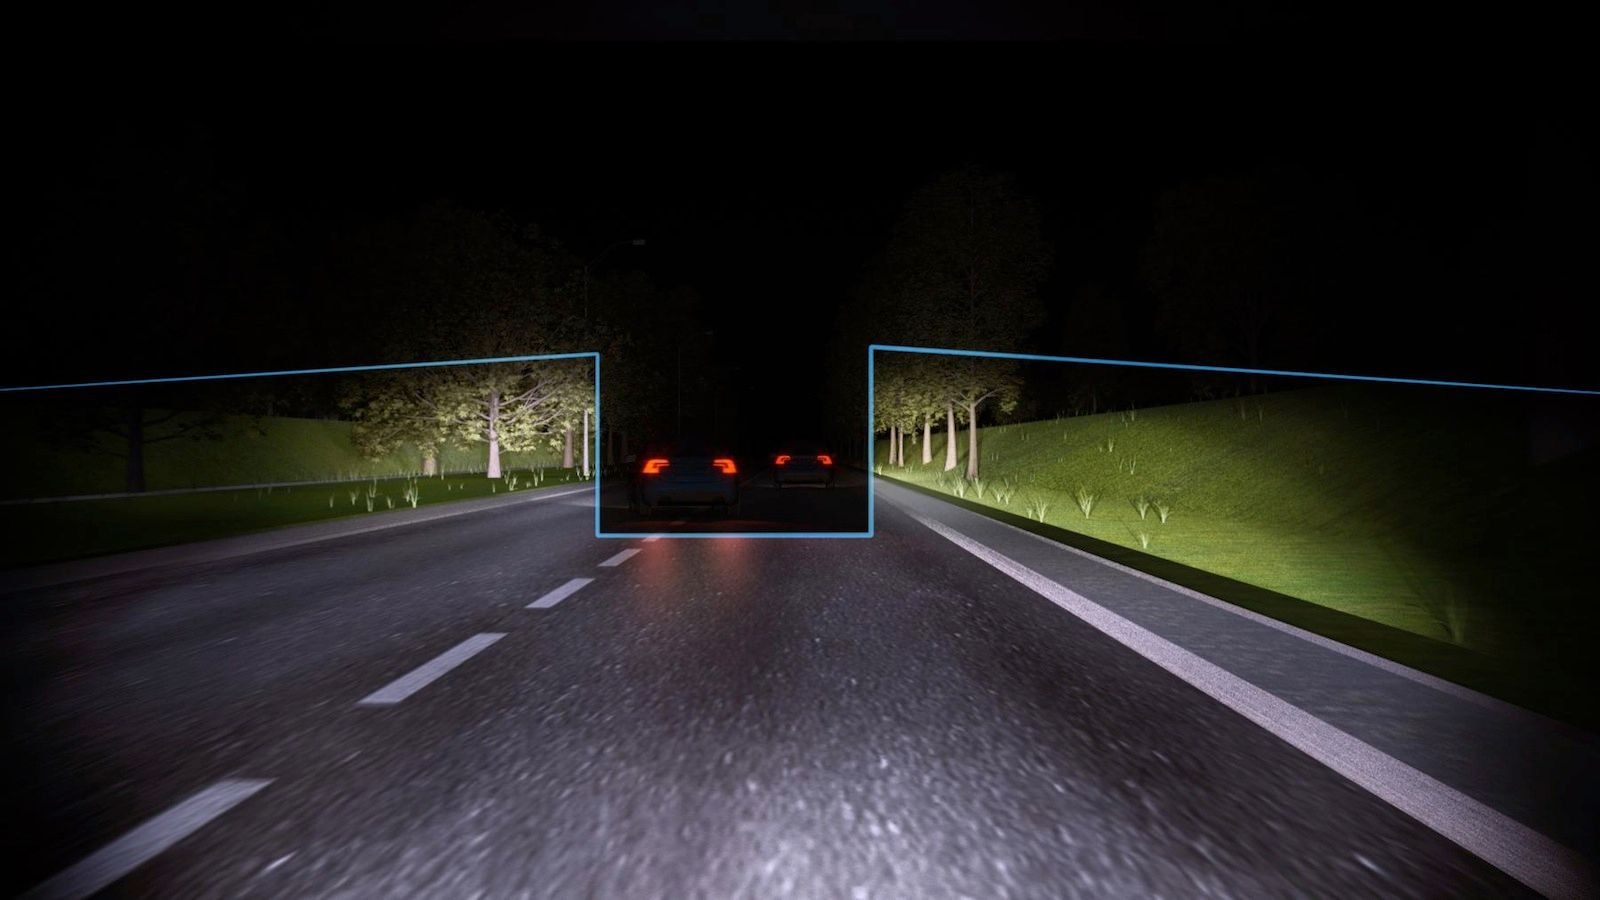 Volvo's updated Active High Beam Control